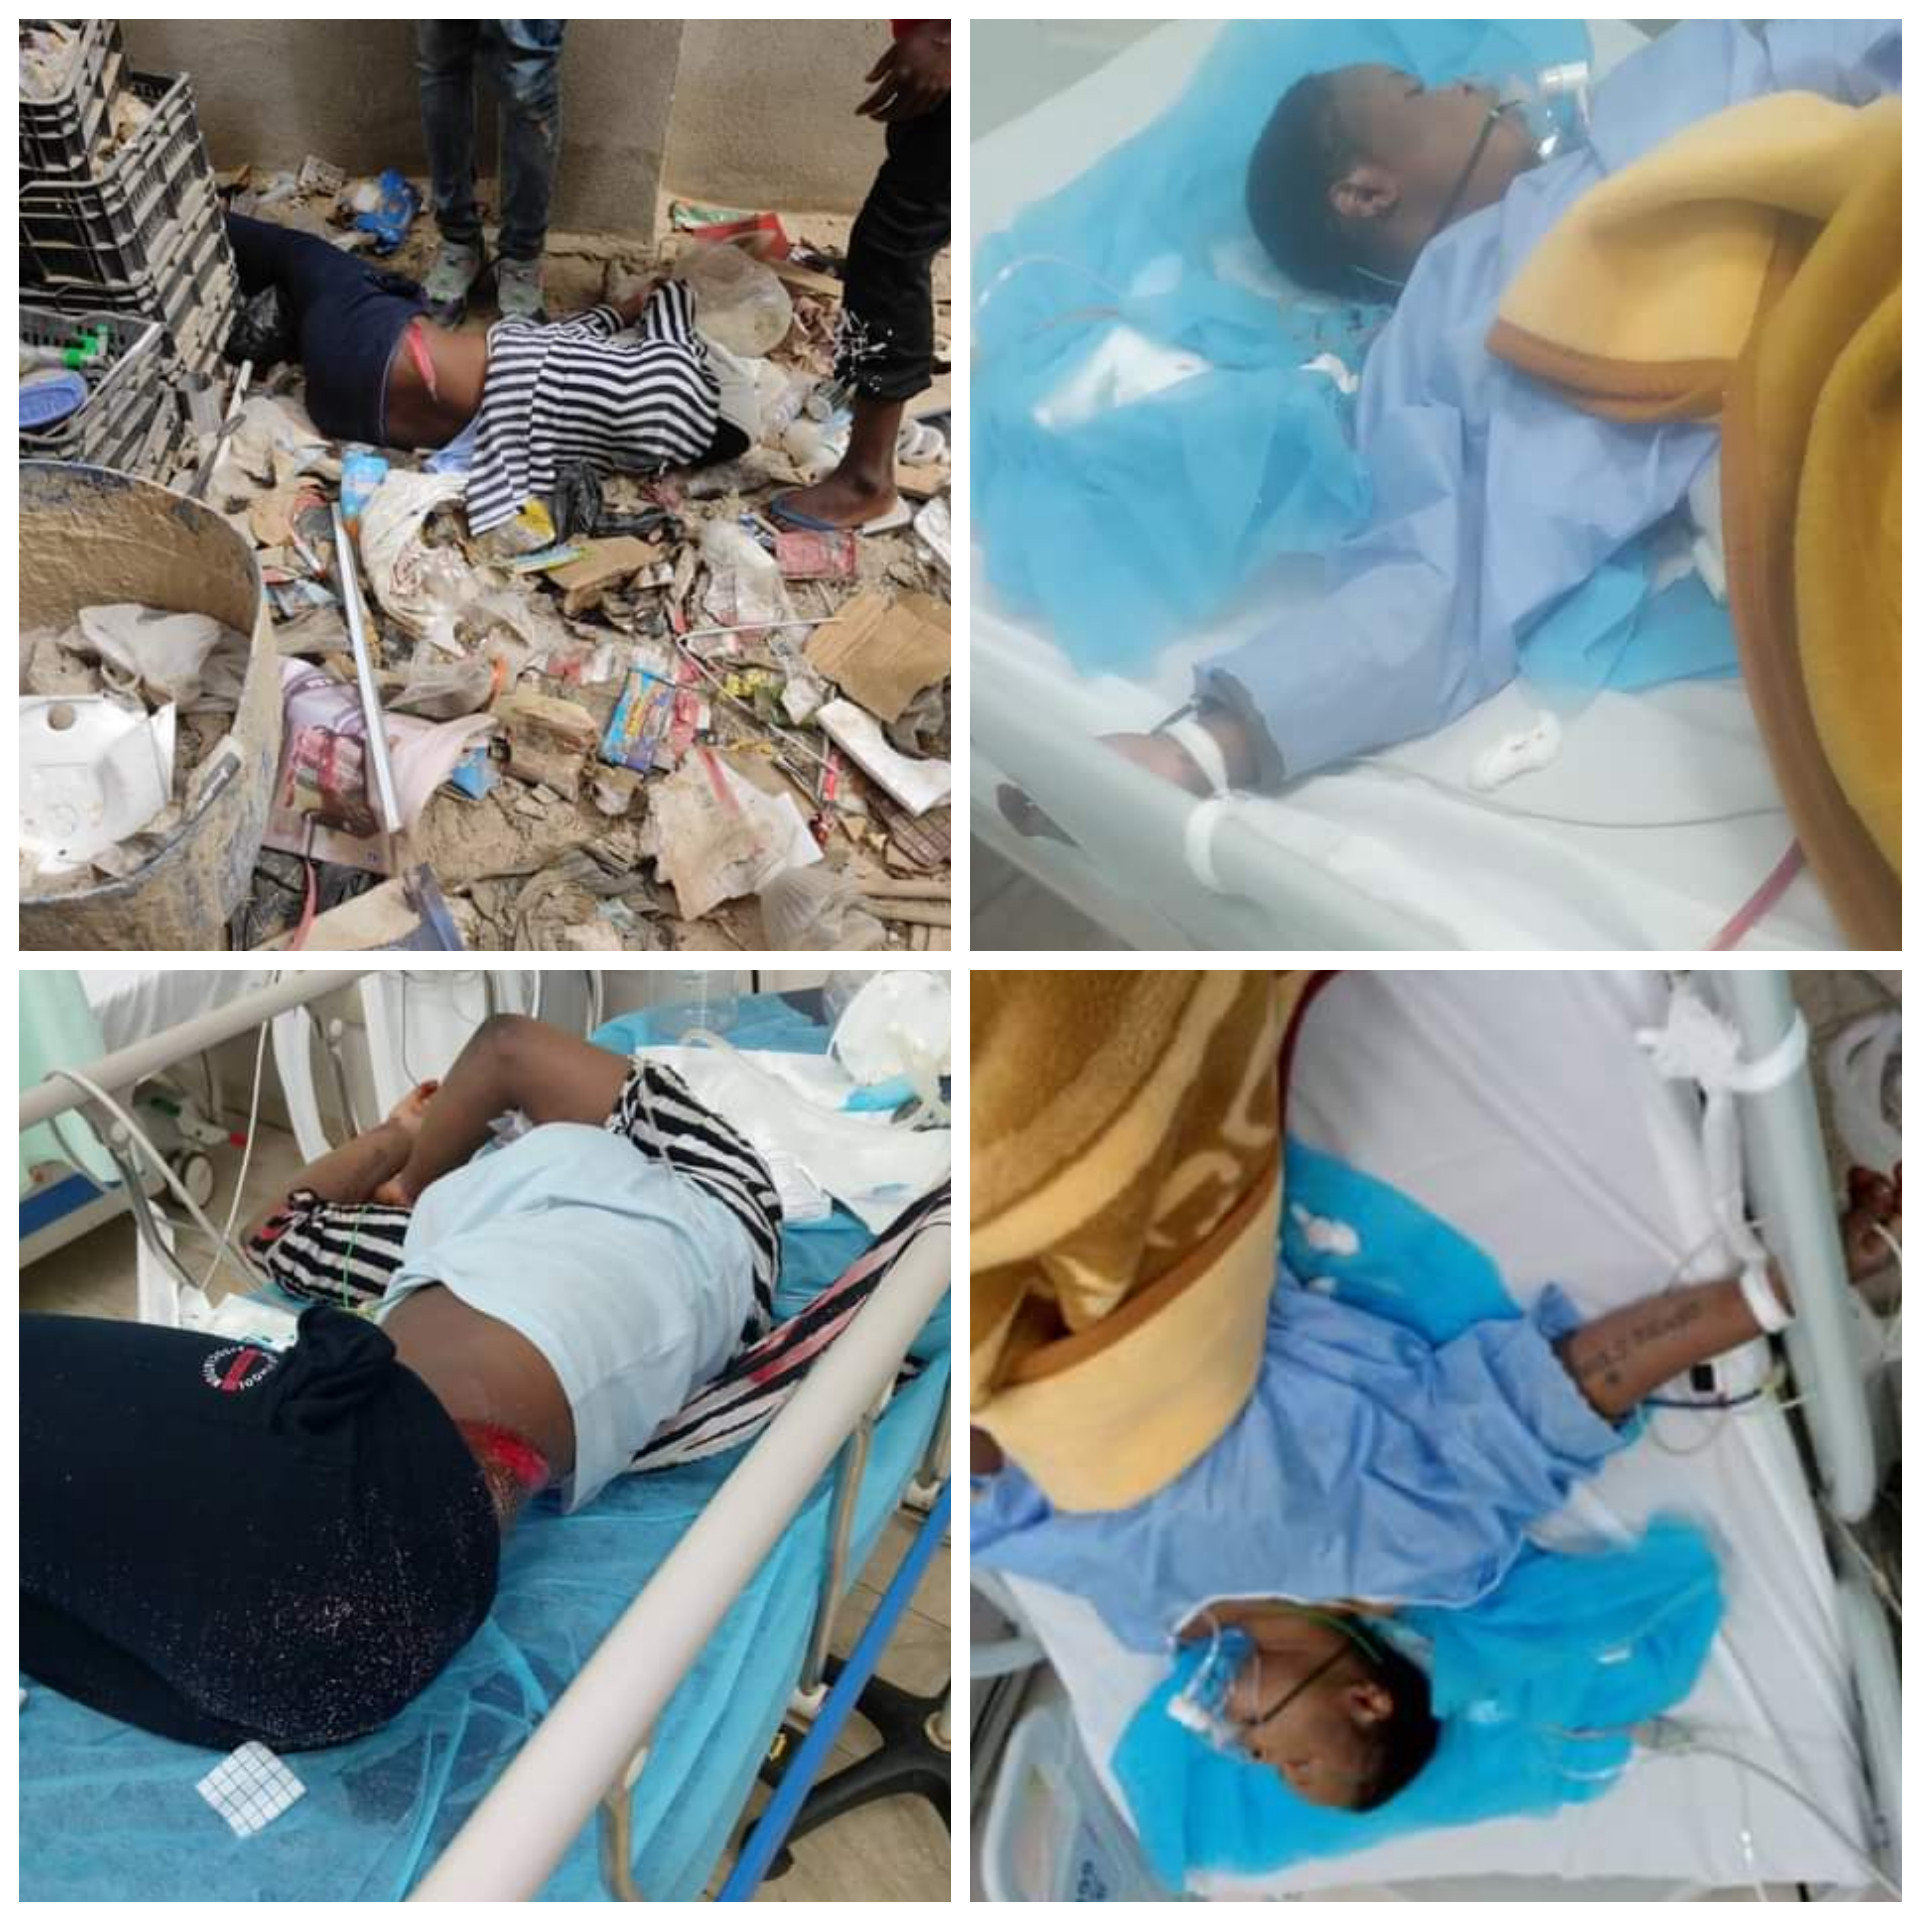 Nigerian lady fighting for life in Libya after suspected human trafficker allegedly pushed her off 3-storey building